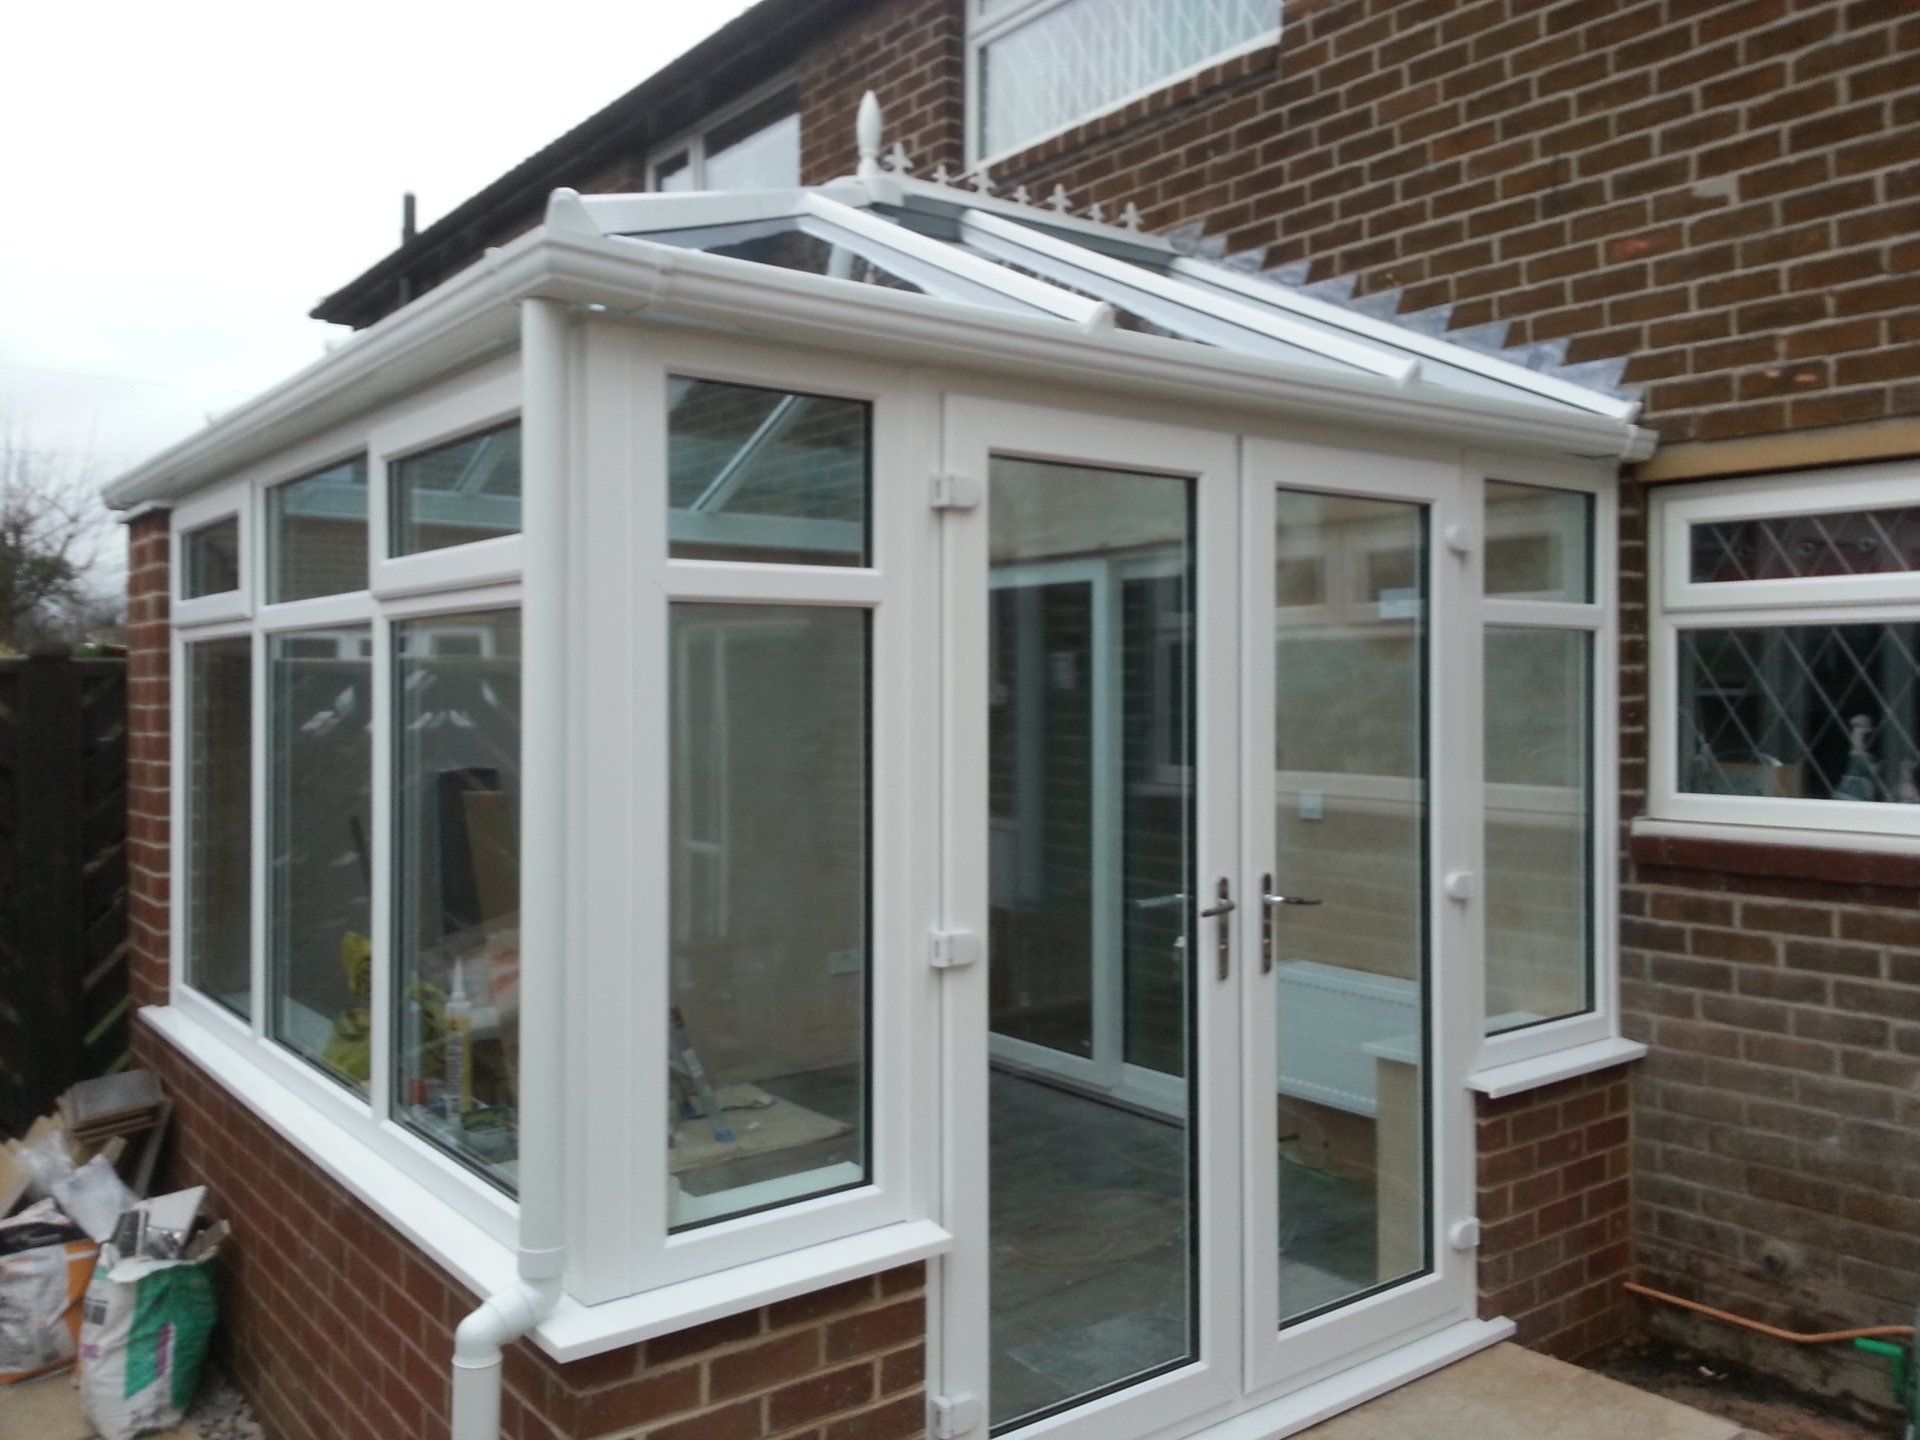 Conservatory Refurb, Repairs & Maintenance, Conservatories, Conservatory Glass Roofs, Repairs to Conservatories, Poly Carb Roof Replacement, Roof Lanterns, Roof Pods.